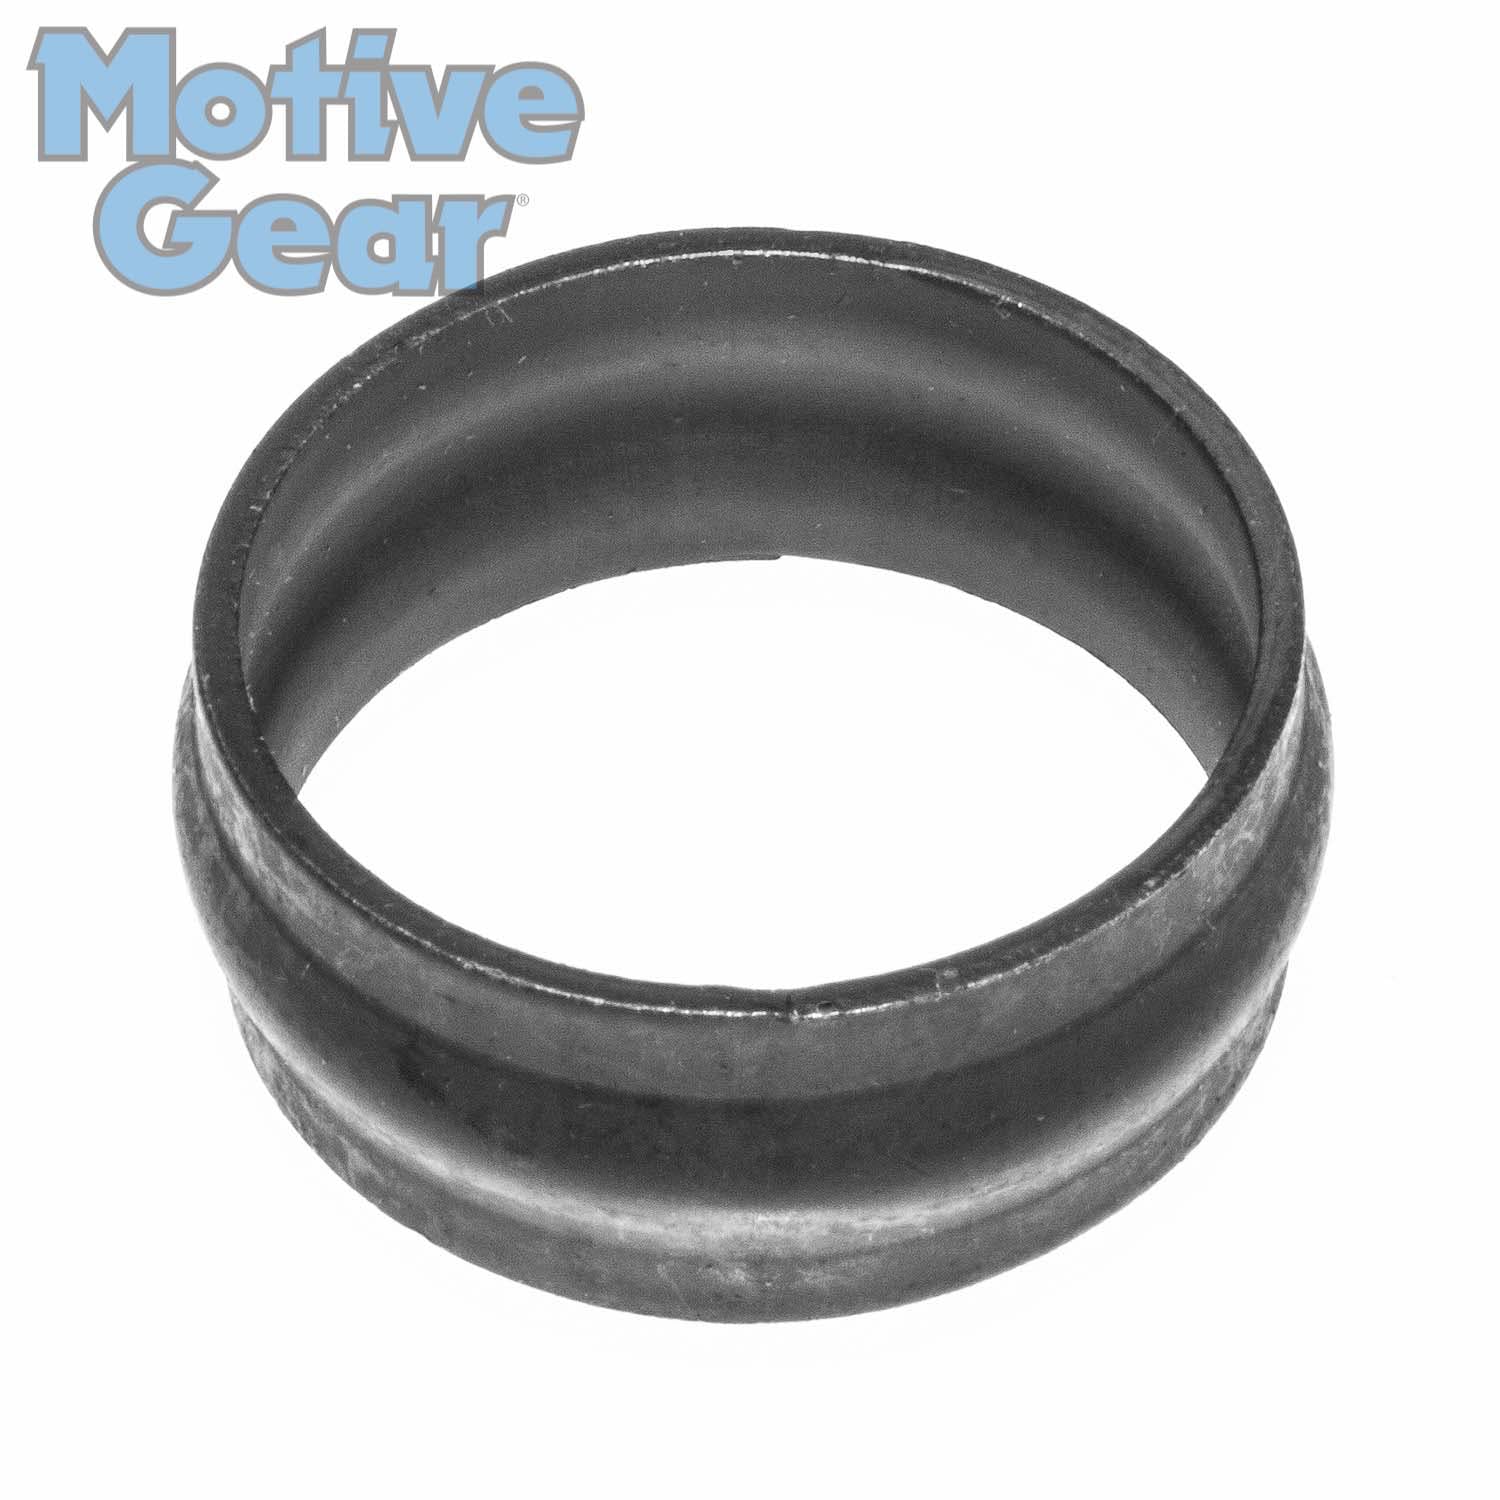 Motive Gear 14012691 Differential Crush Sleeve